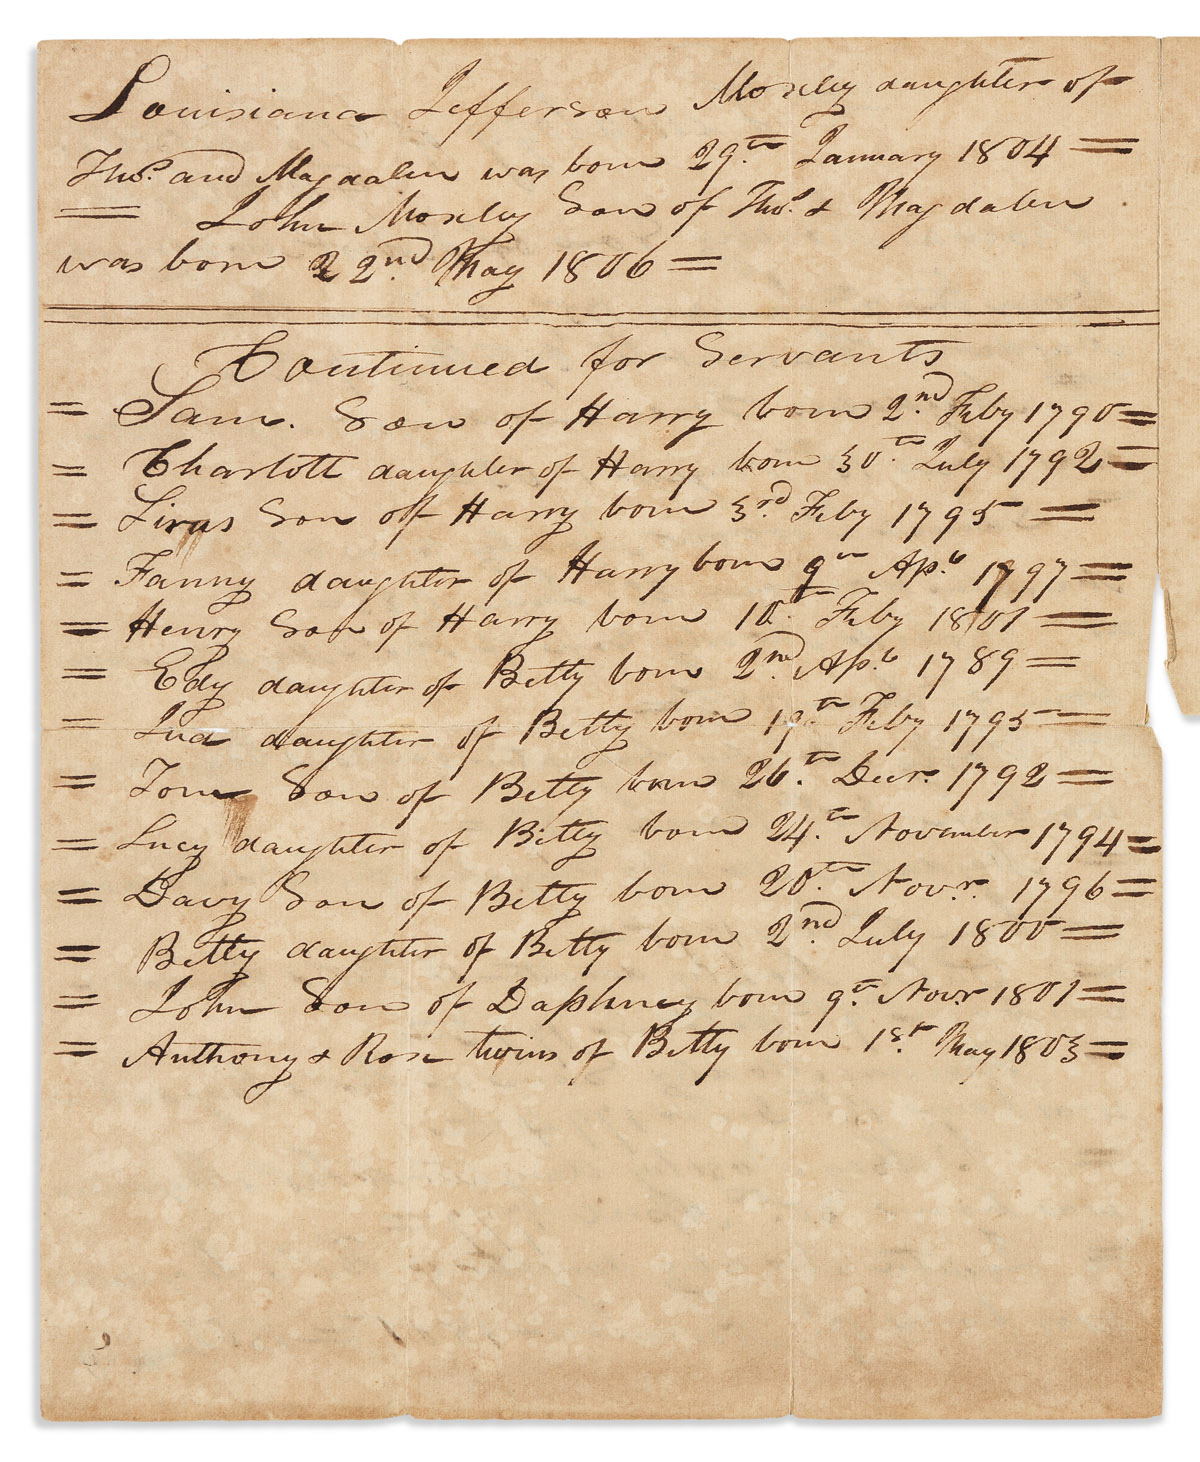 (SLAVERY & ABOLITION.) Moseley family register listing the births and parents of 13 enslaved people.